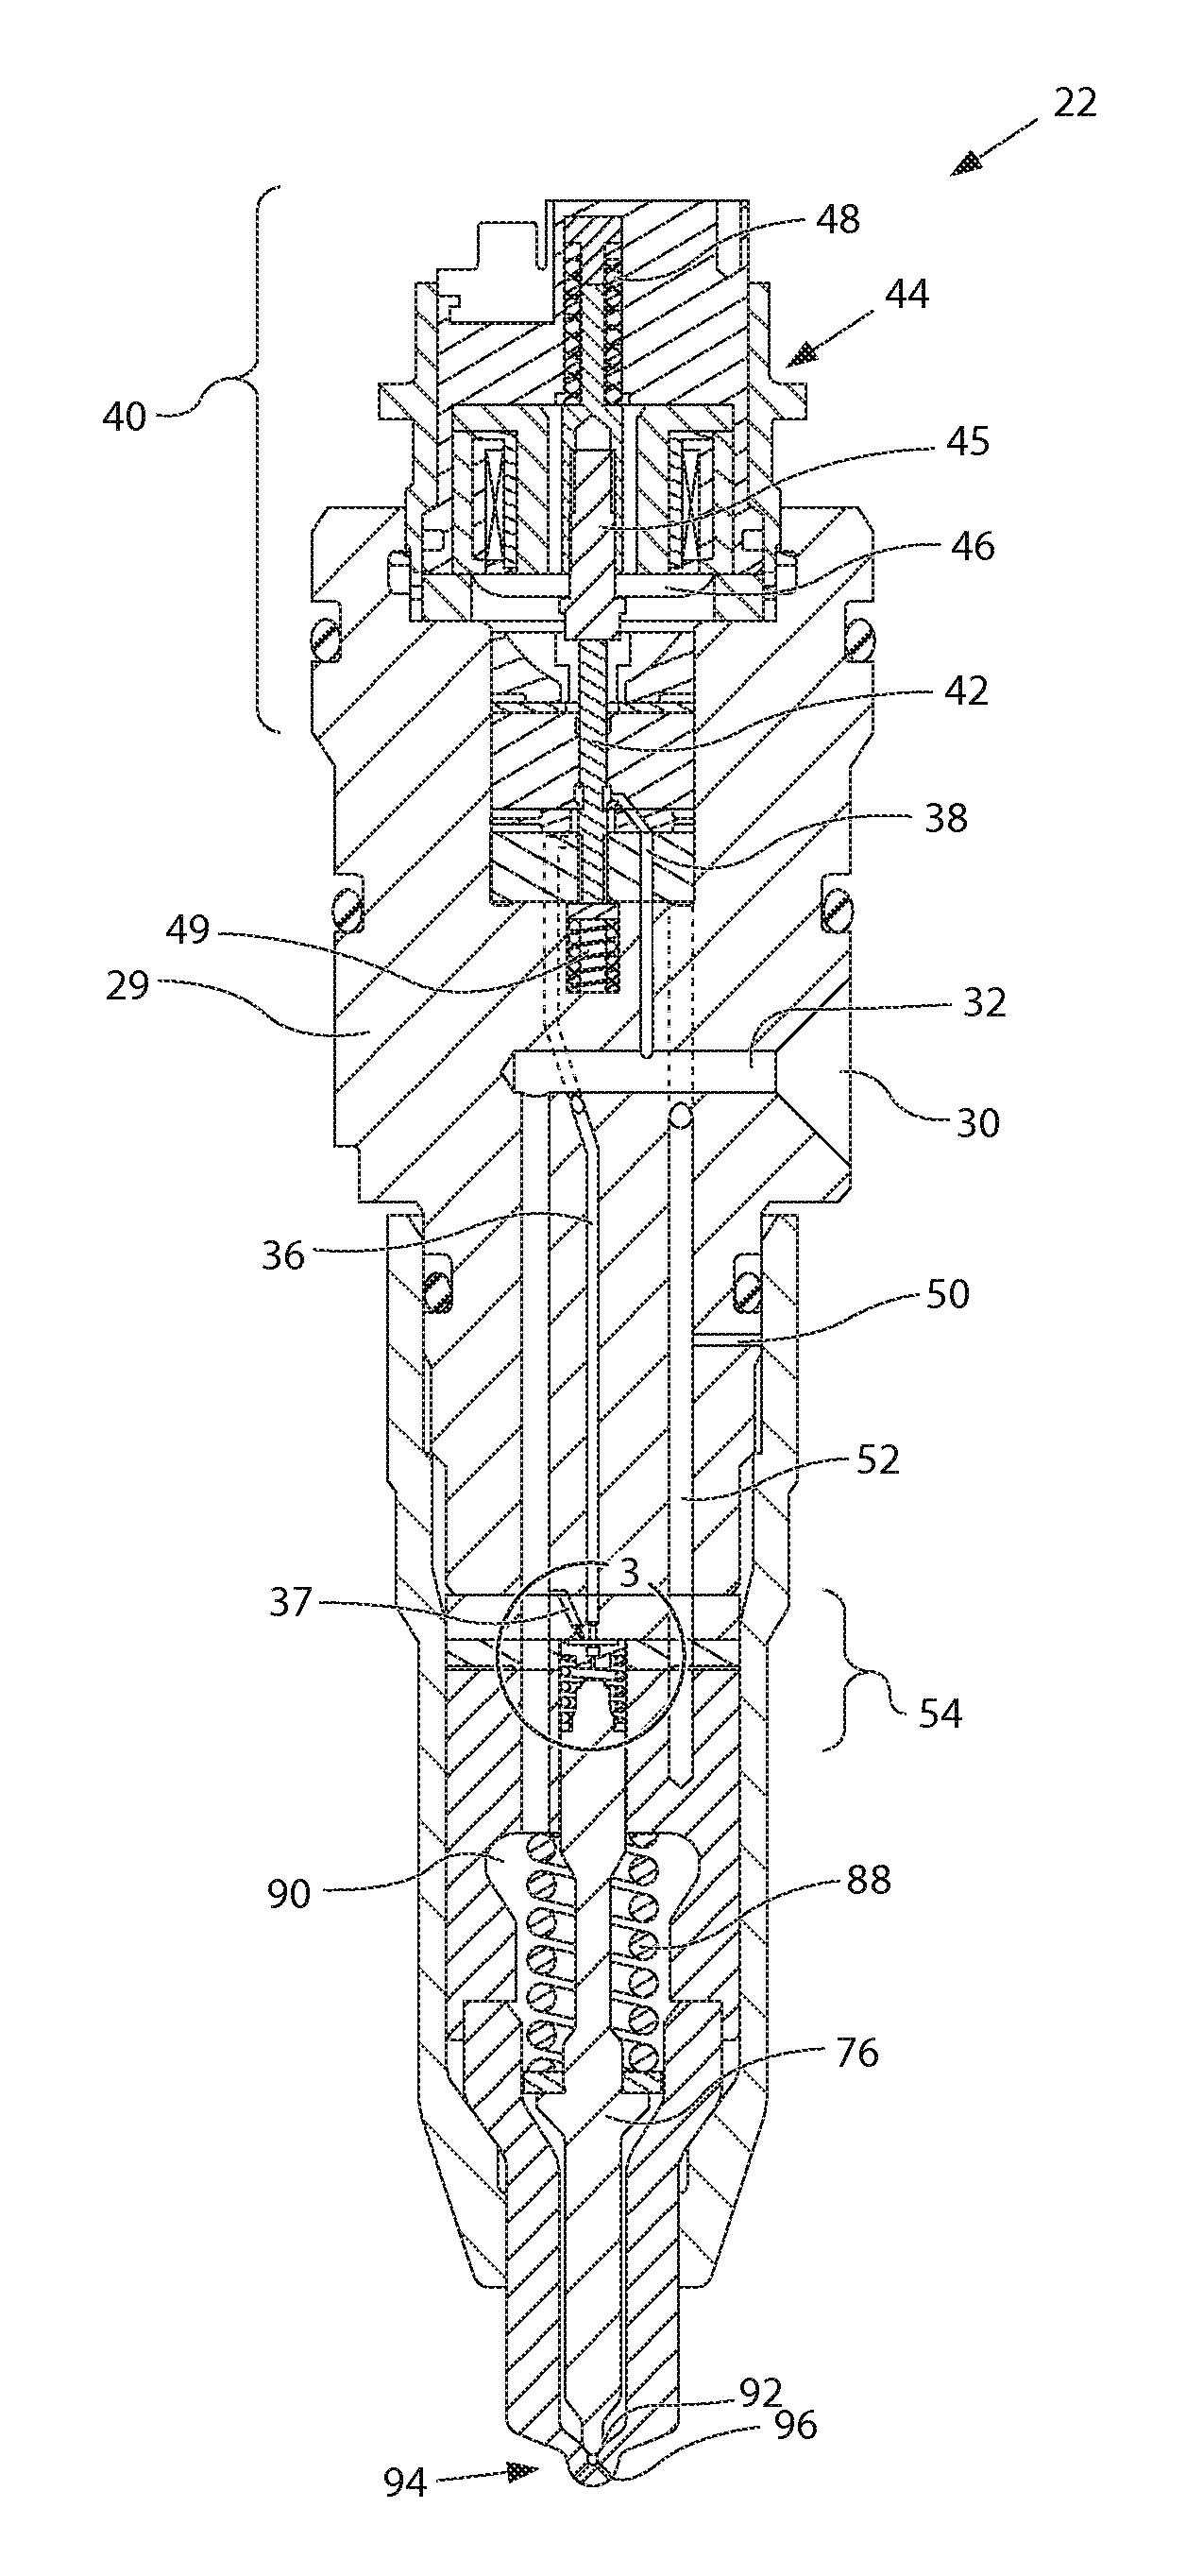 Fluid injector with rate shaping capability